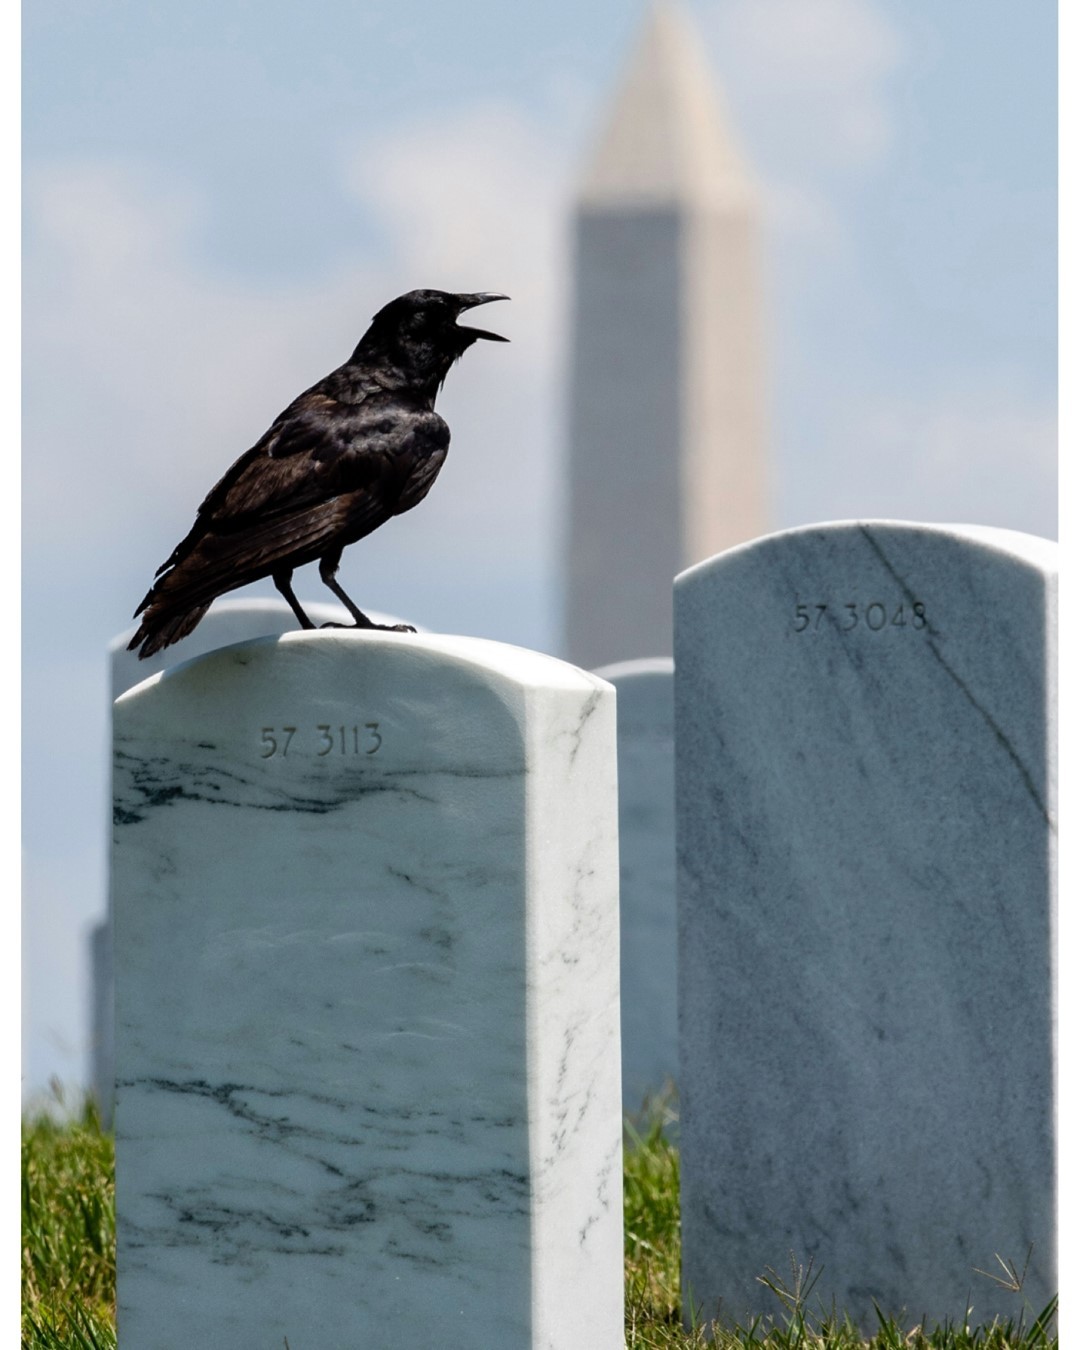 A crow perches on a headstone in Section 57 of Arlington National Cemetery overlooking the Washington Monument.

The crow represents change or transformation. It is a symbol of much more than that, and it refers more to a spiritual or emotional change. These intelligent birds give us valuable insight into situations around us and help us adapt as needed.

Captured on a service by @arlington.media